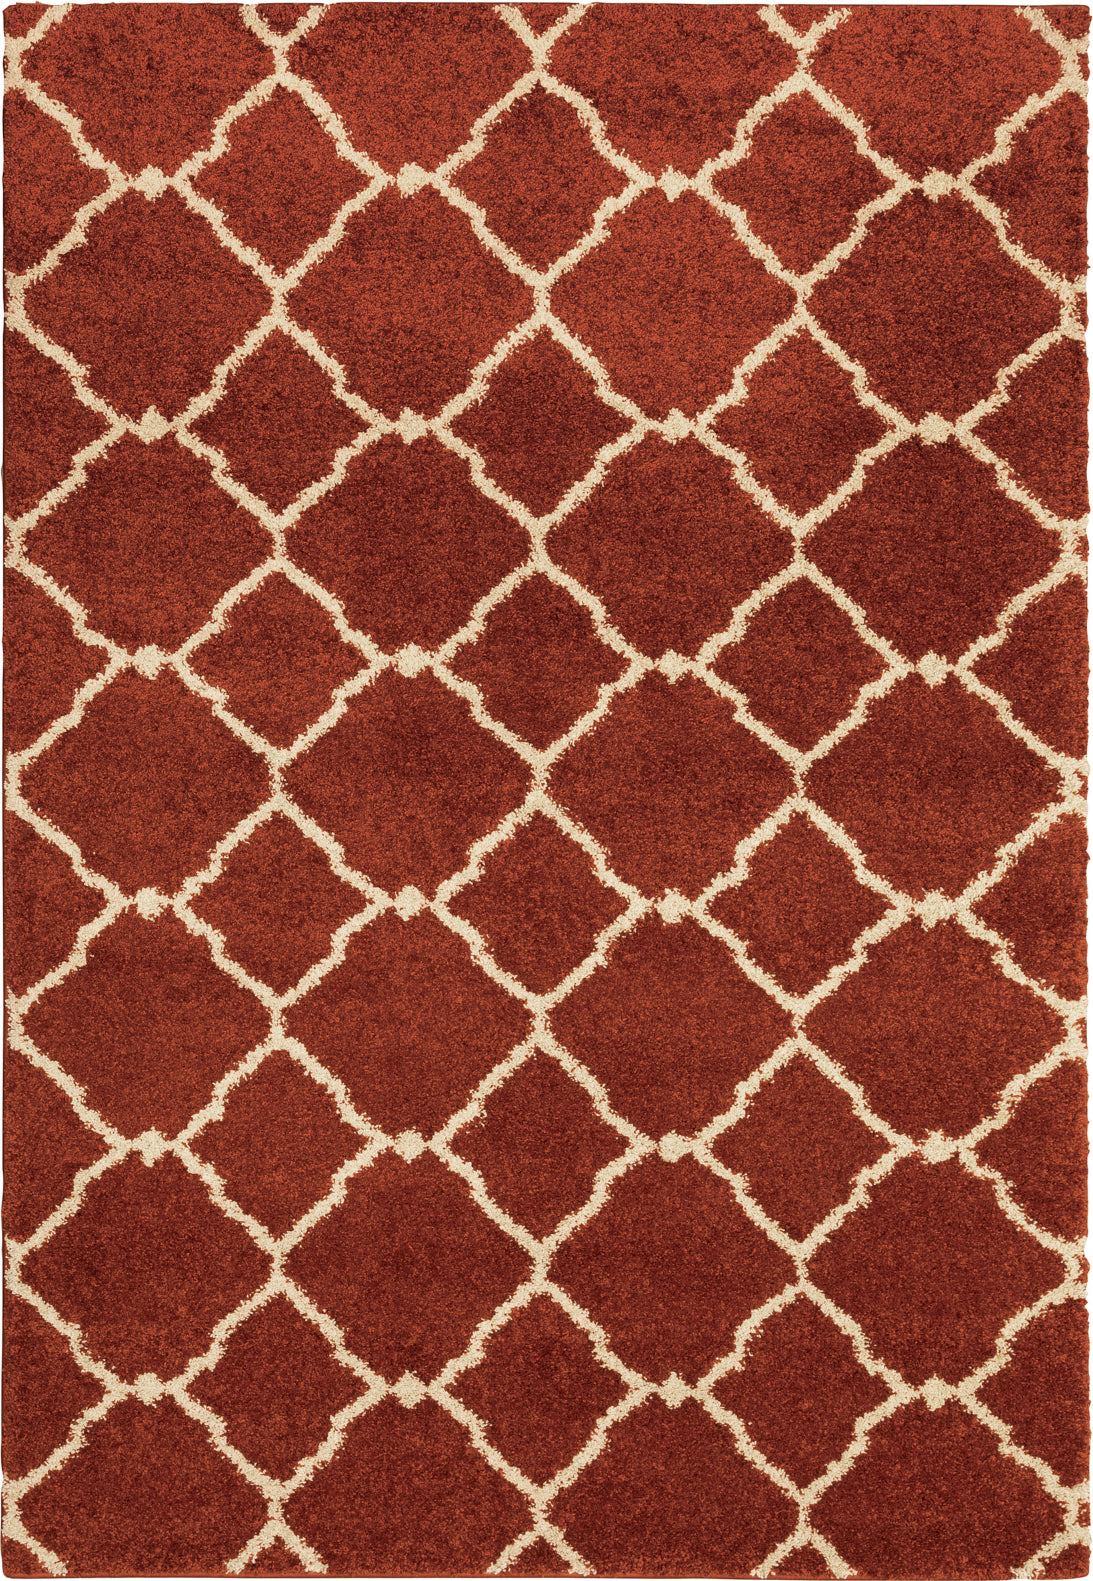 Oriental Weavers Kendall 090R1 Red/Ivory Area Rug main image